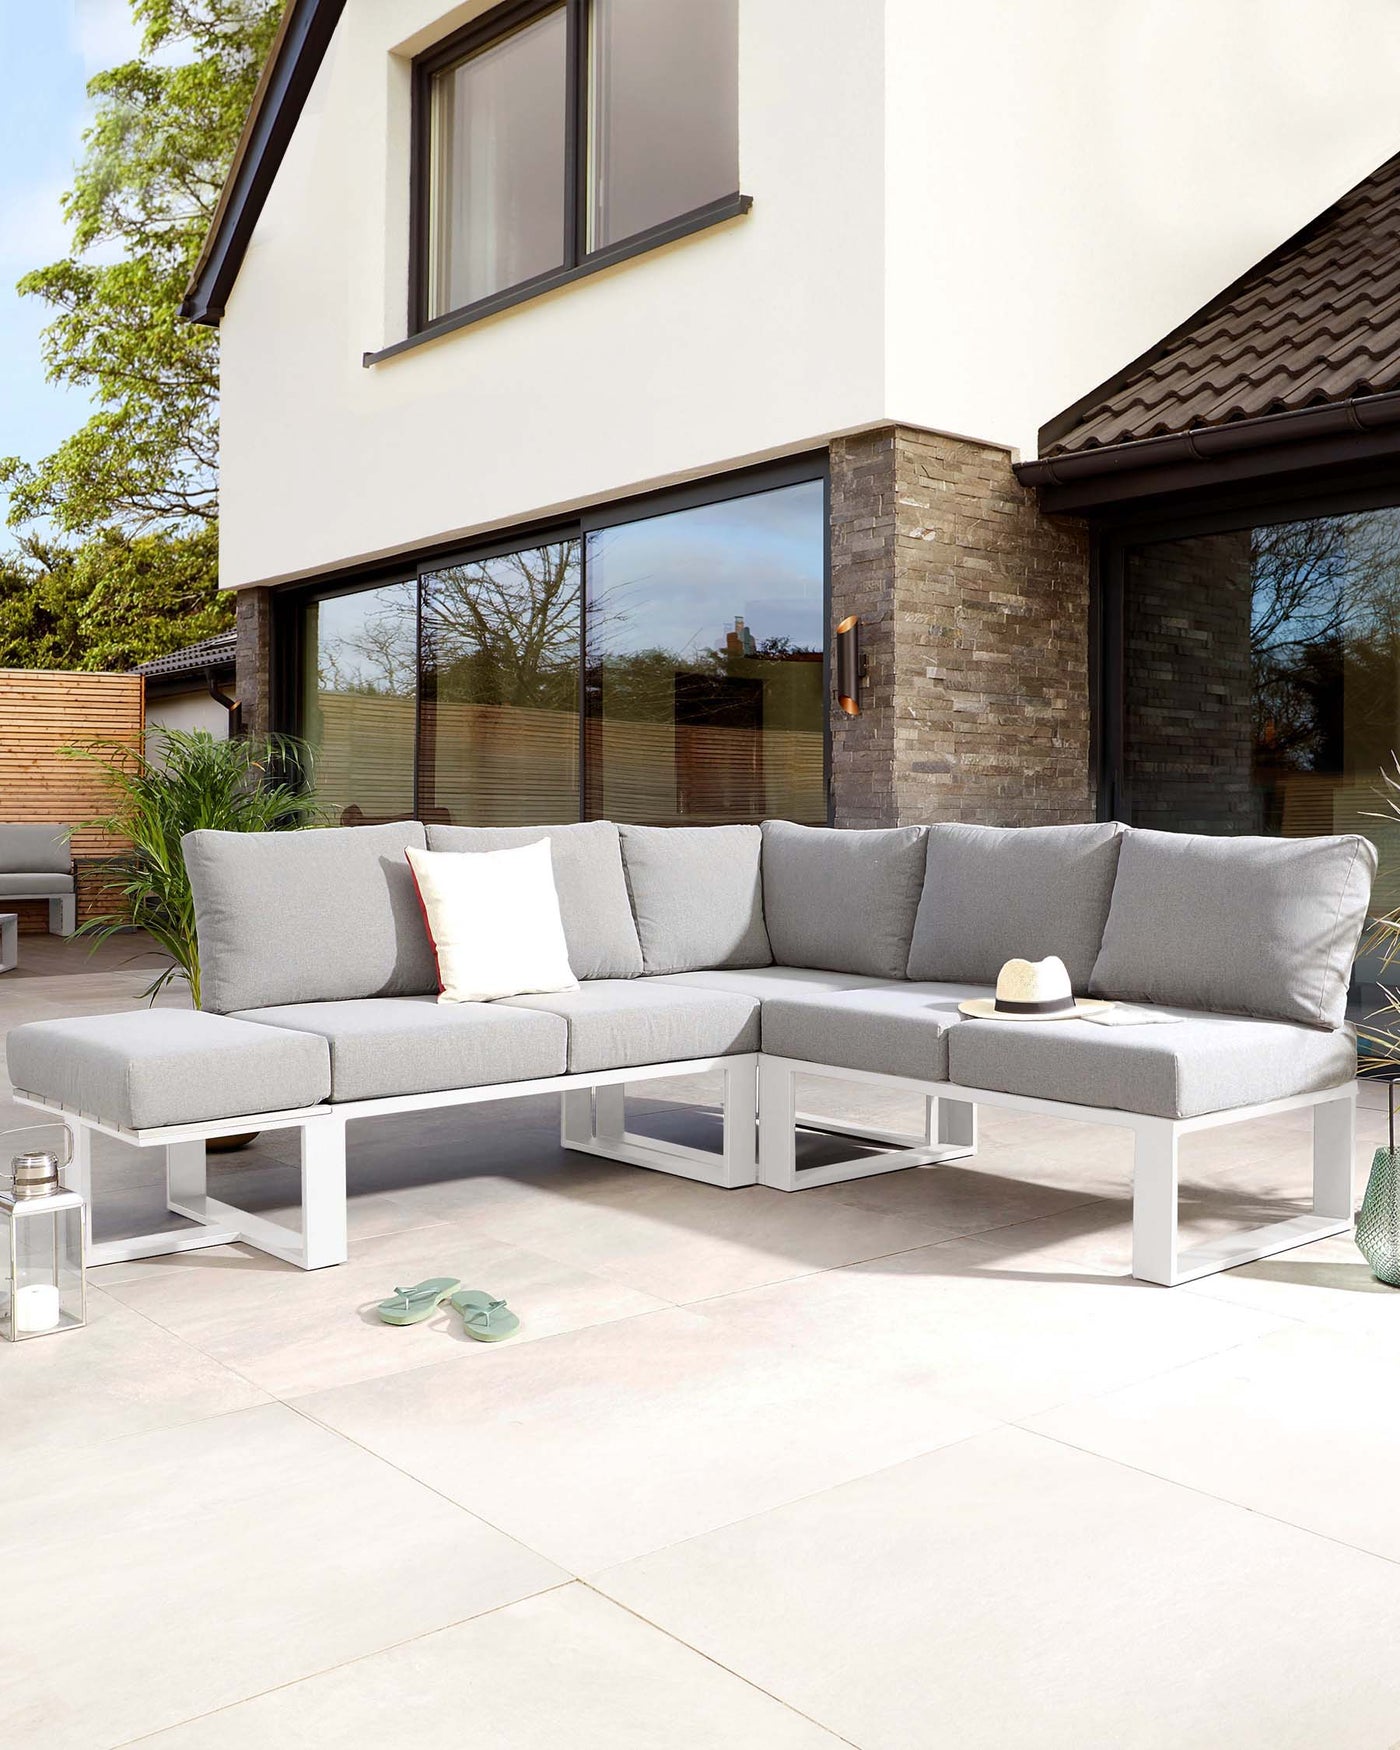 Modern outdoor sectional sofa with light grey cushions on a sleek white aluminium frame, complemented by a matching white low-profile coffee table. The ensemble is accessorized with assorted throw pillows in shades of grey and white, situated on a tiled patio.